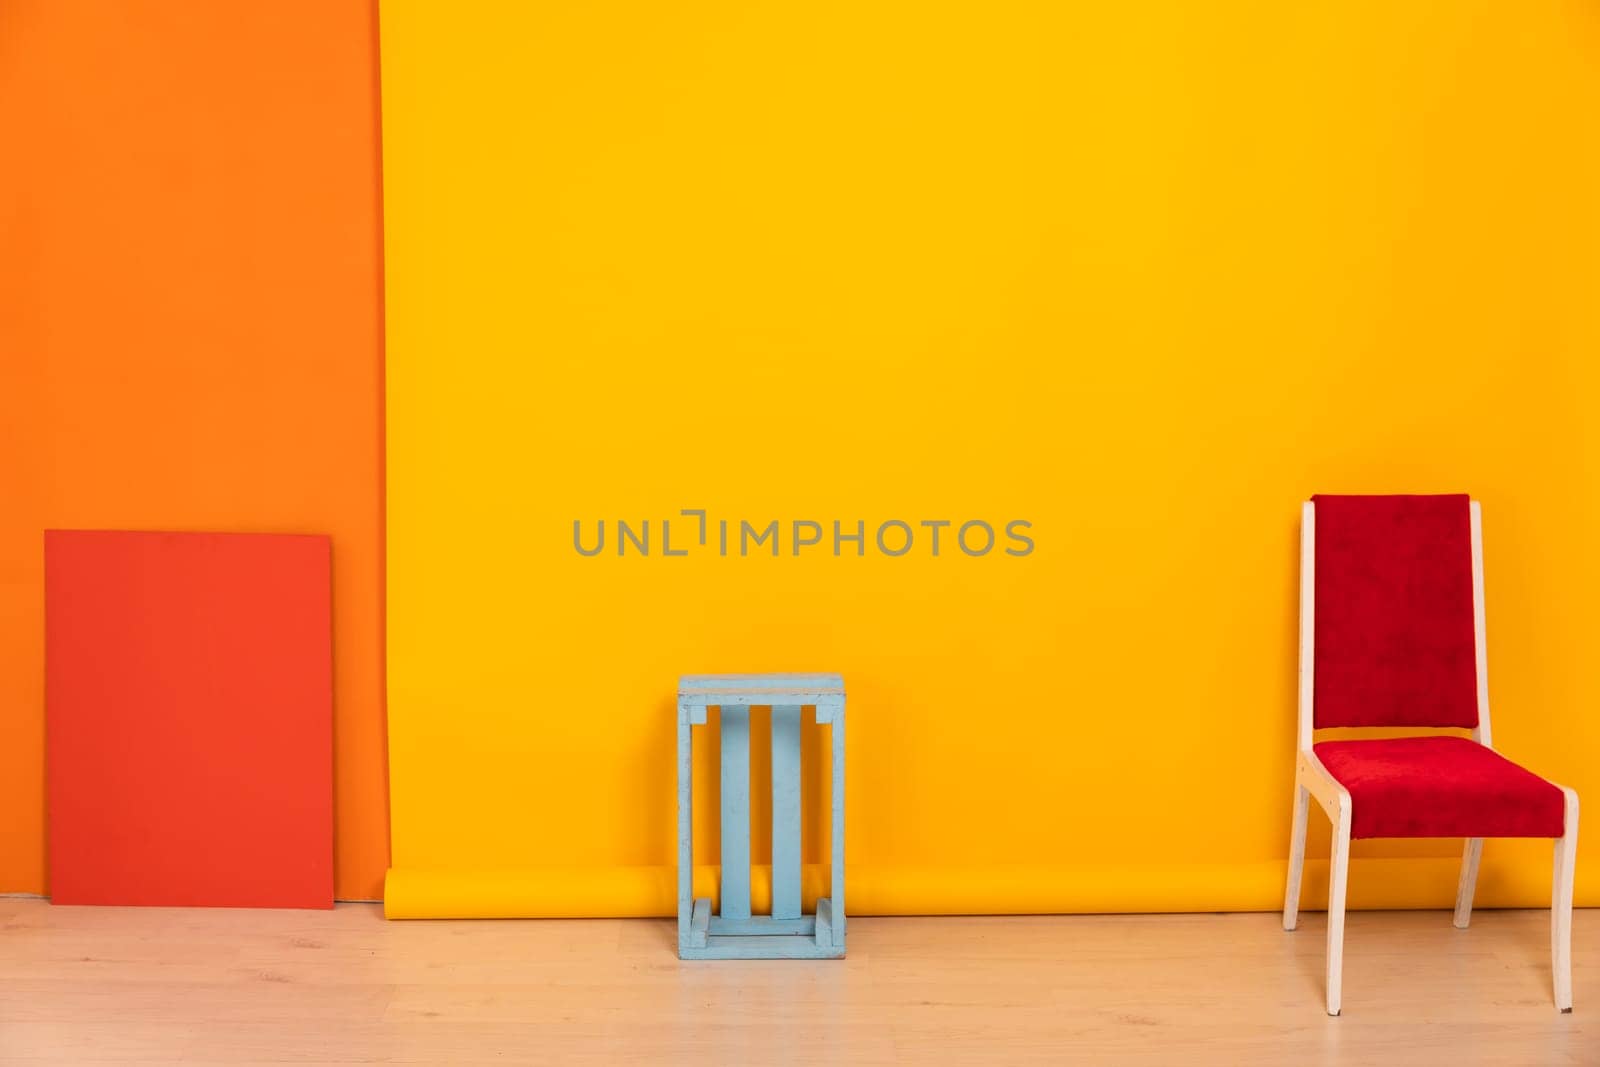 One red chair against a yellow-orange wall by Simakov